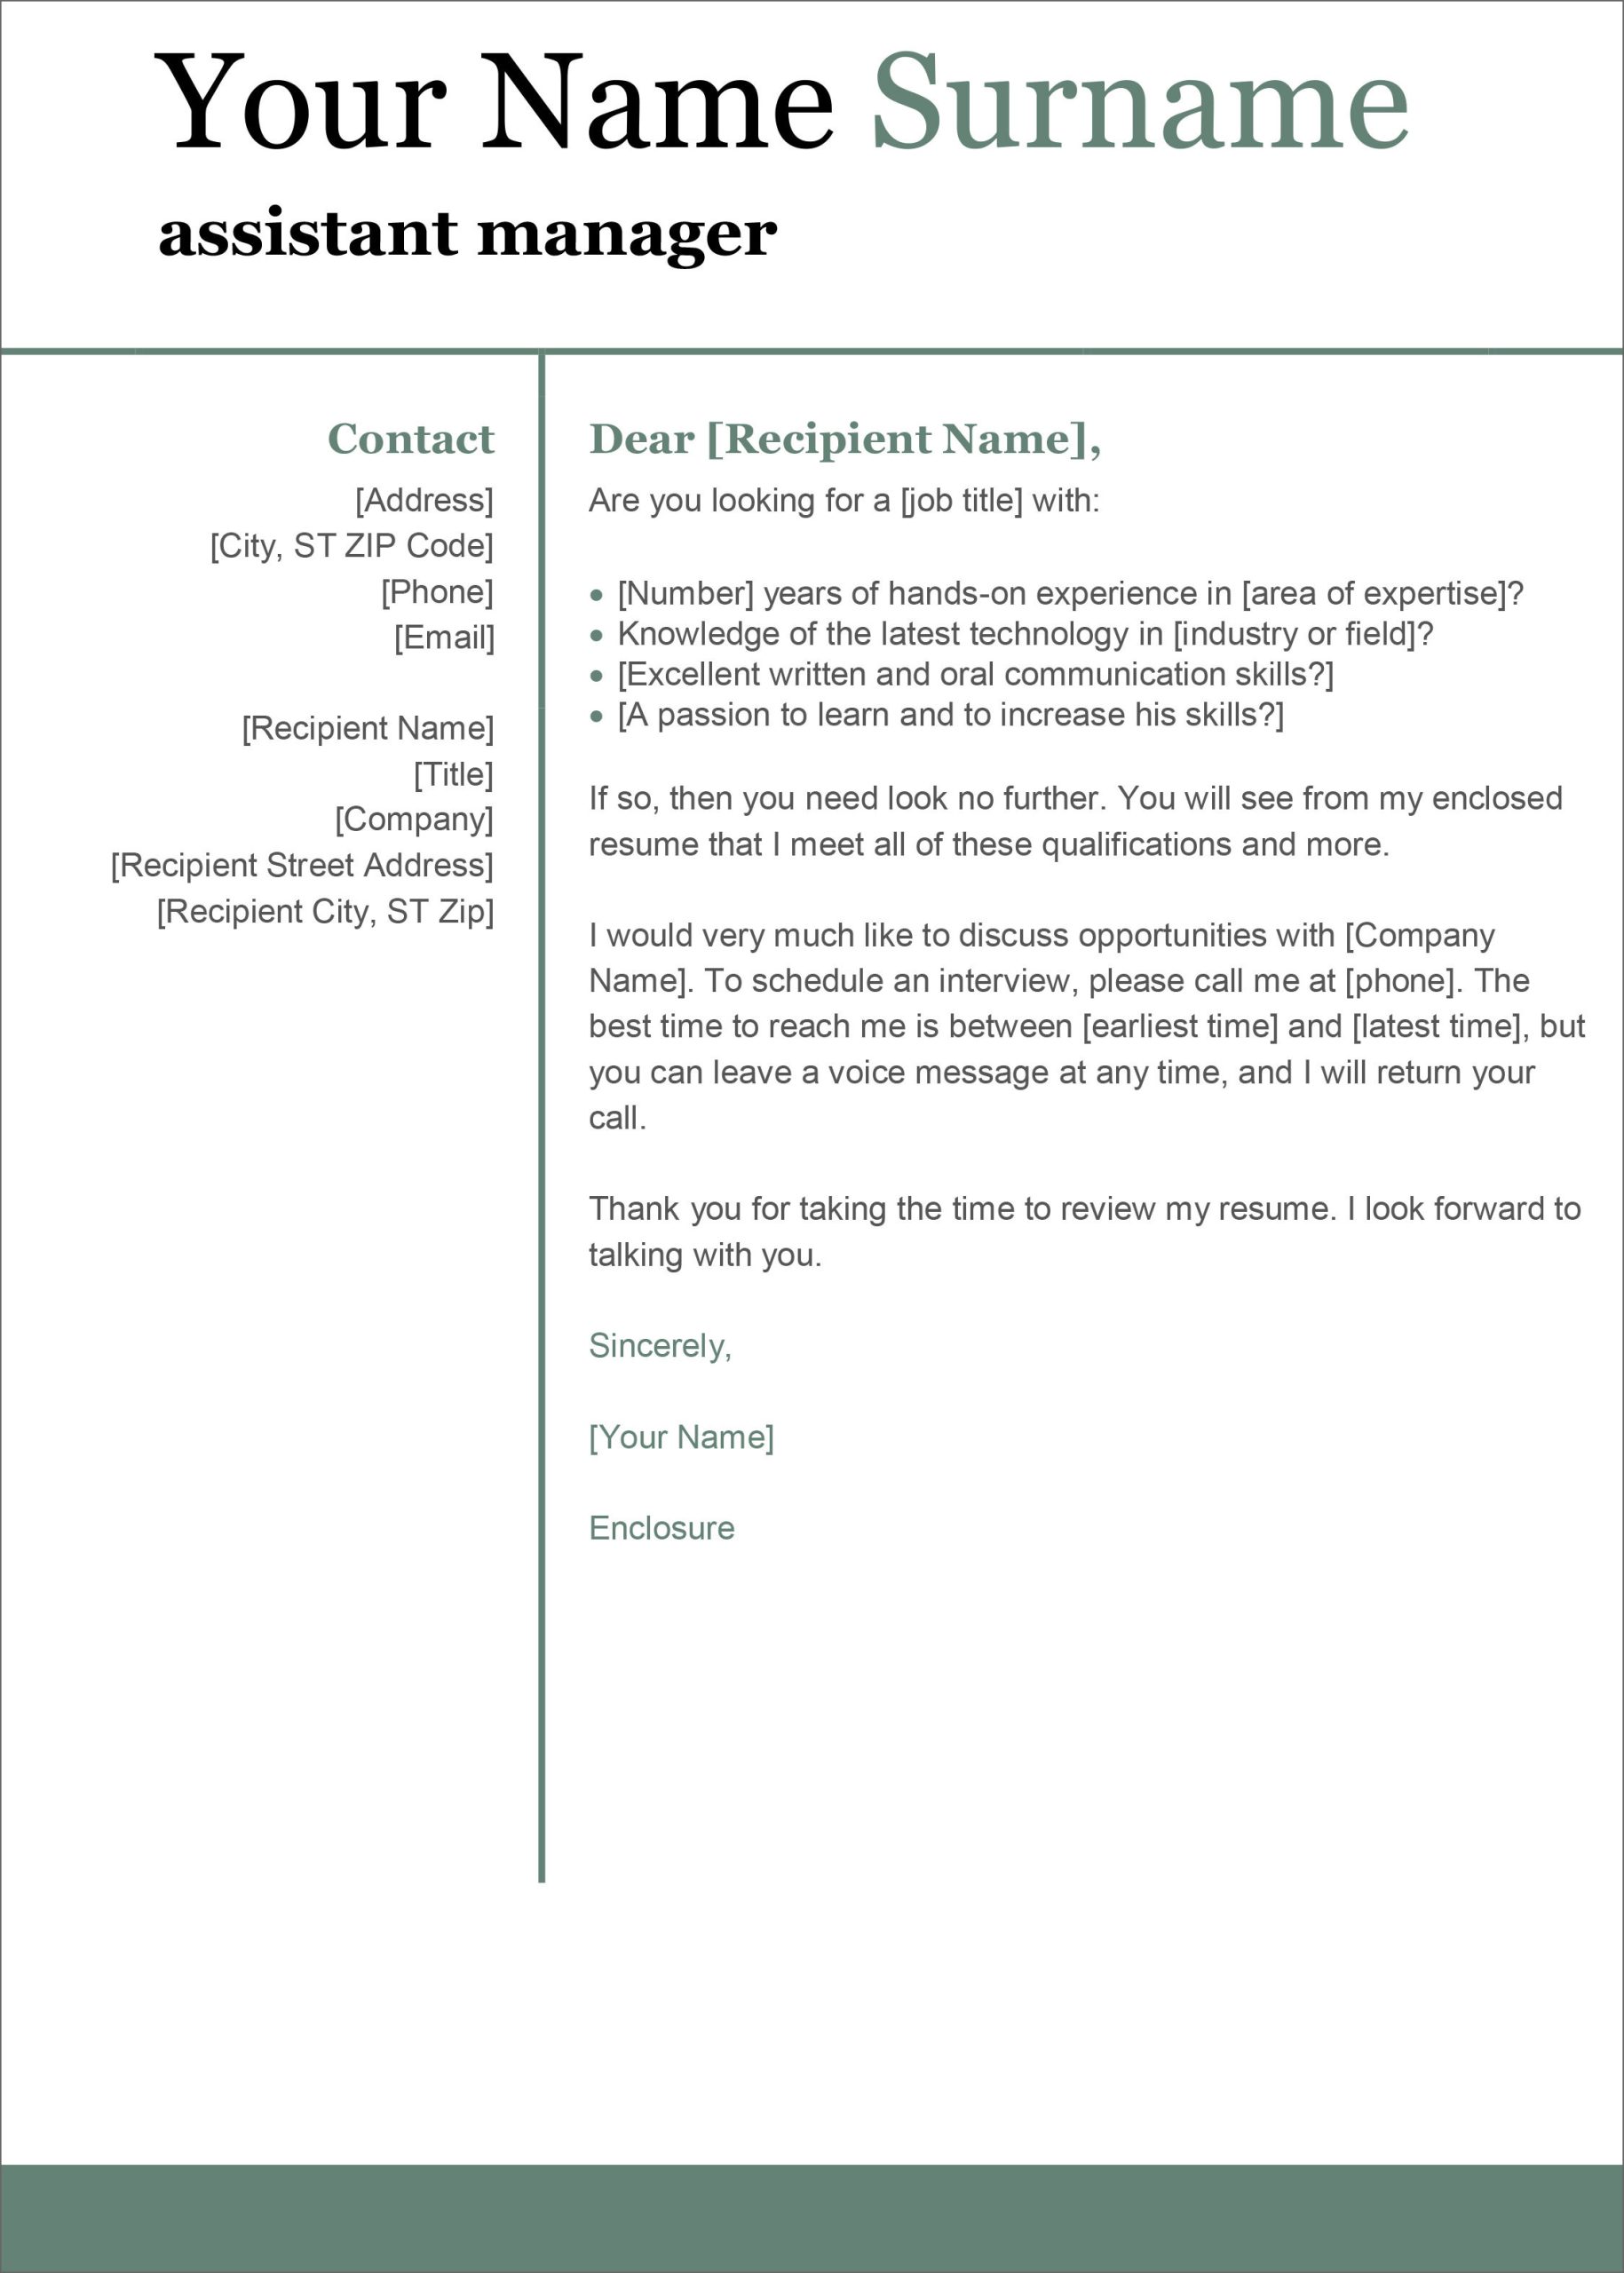 Free Printable Sample Cover Letters for Resumes 13 Free Cover Letter Templates for Microsoft Word Docx and Google Docs